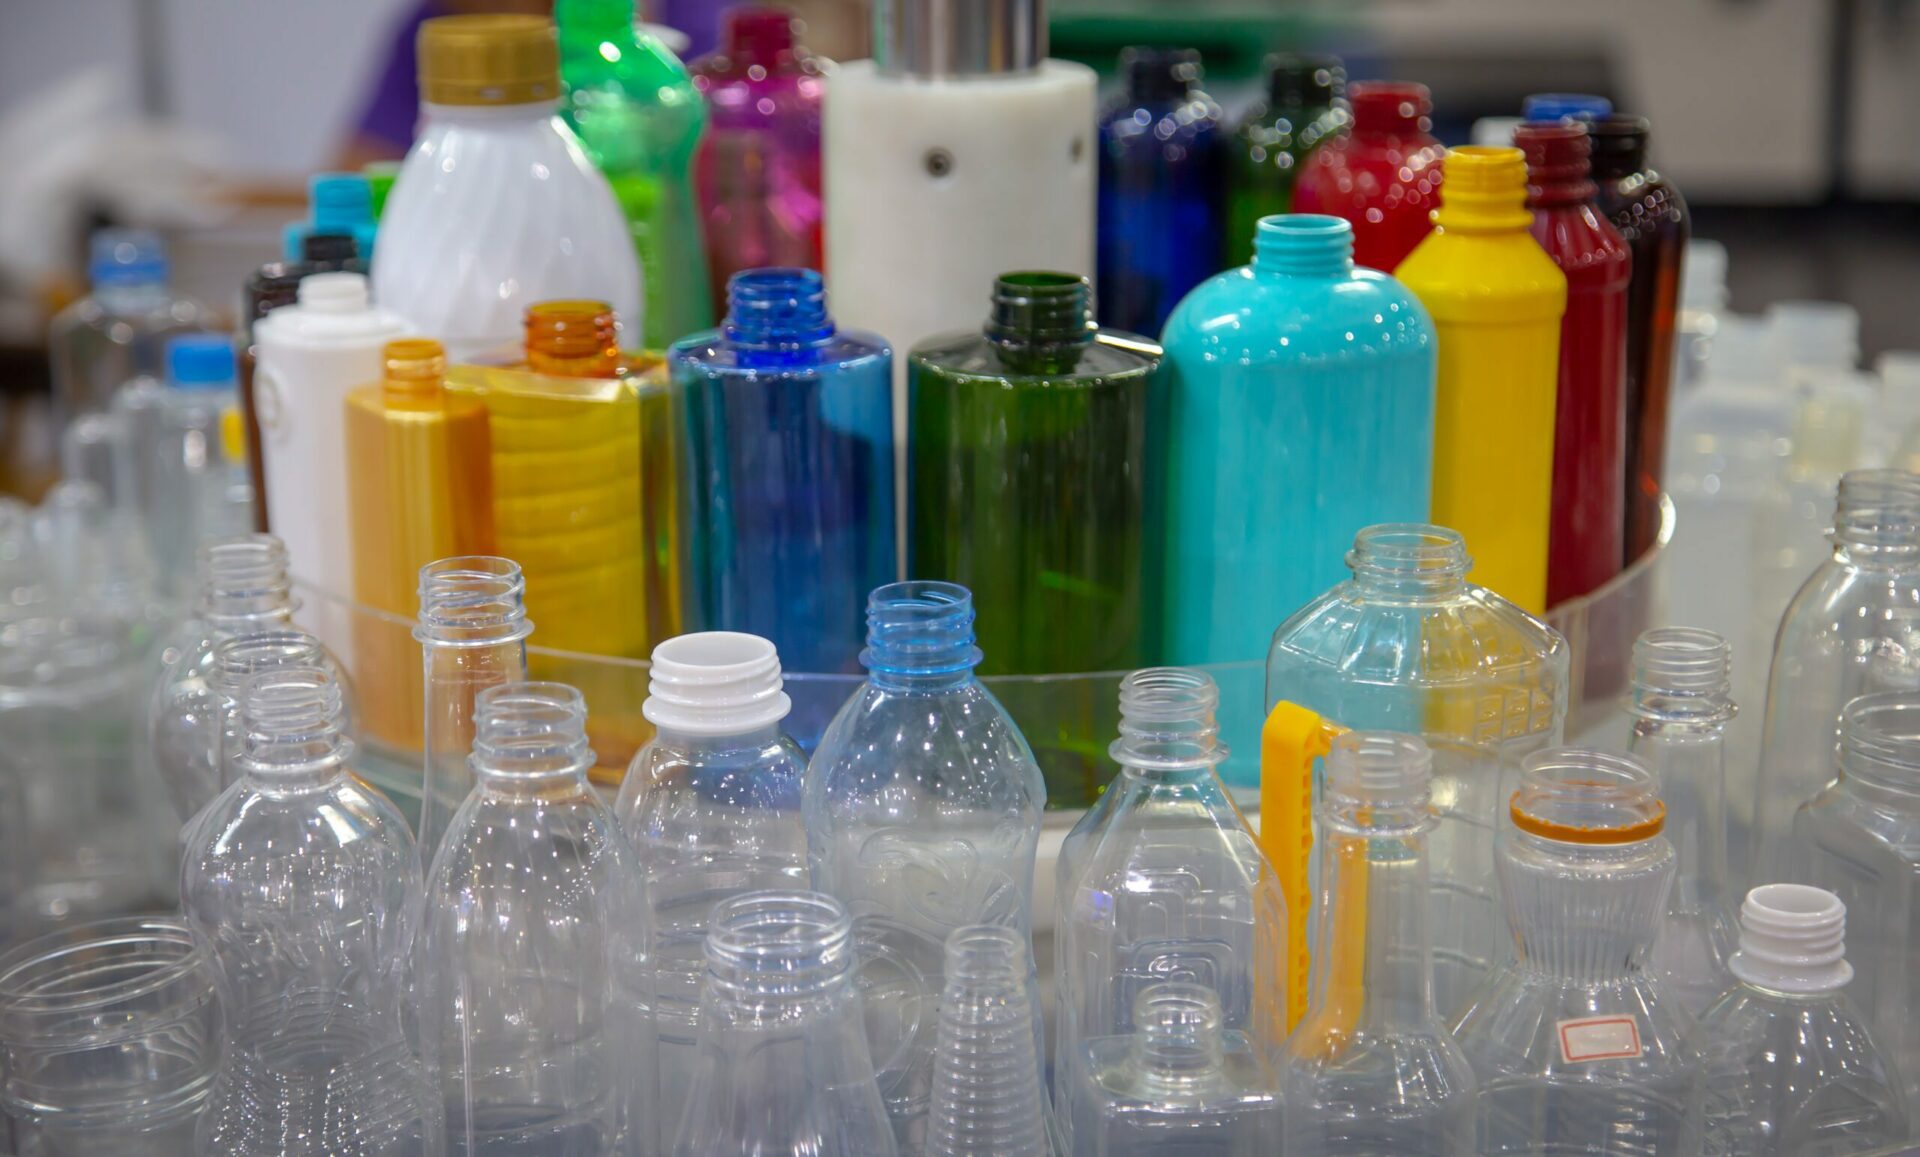 Plastic products, including microplastics, are a concern due to their now-unwavering presence globally, leaching out EDCs into the environment.